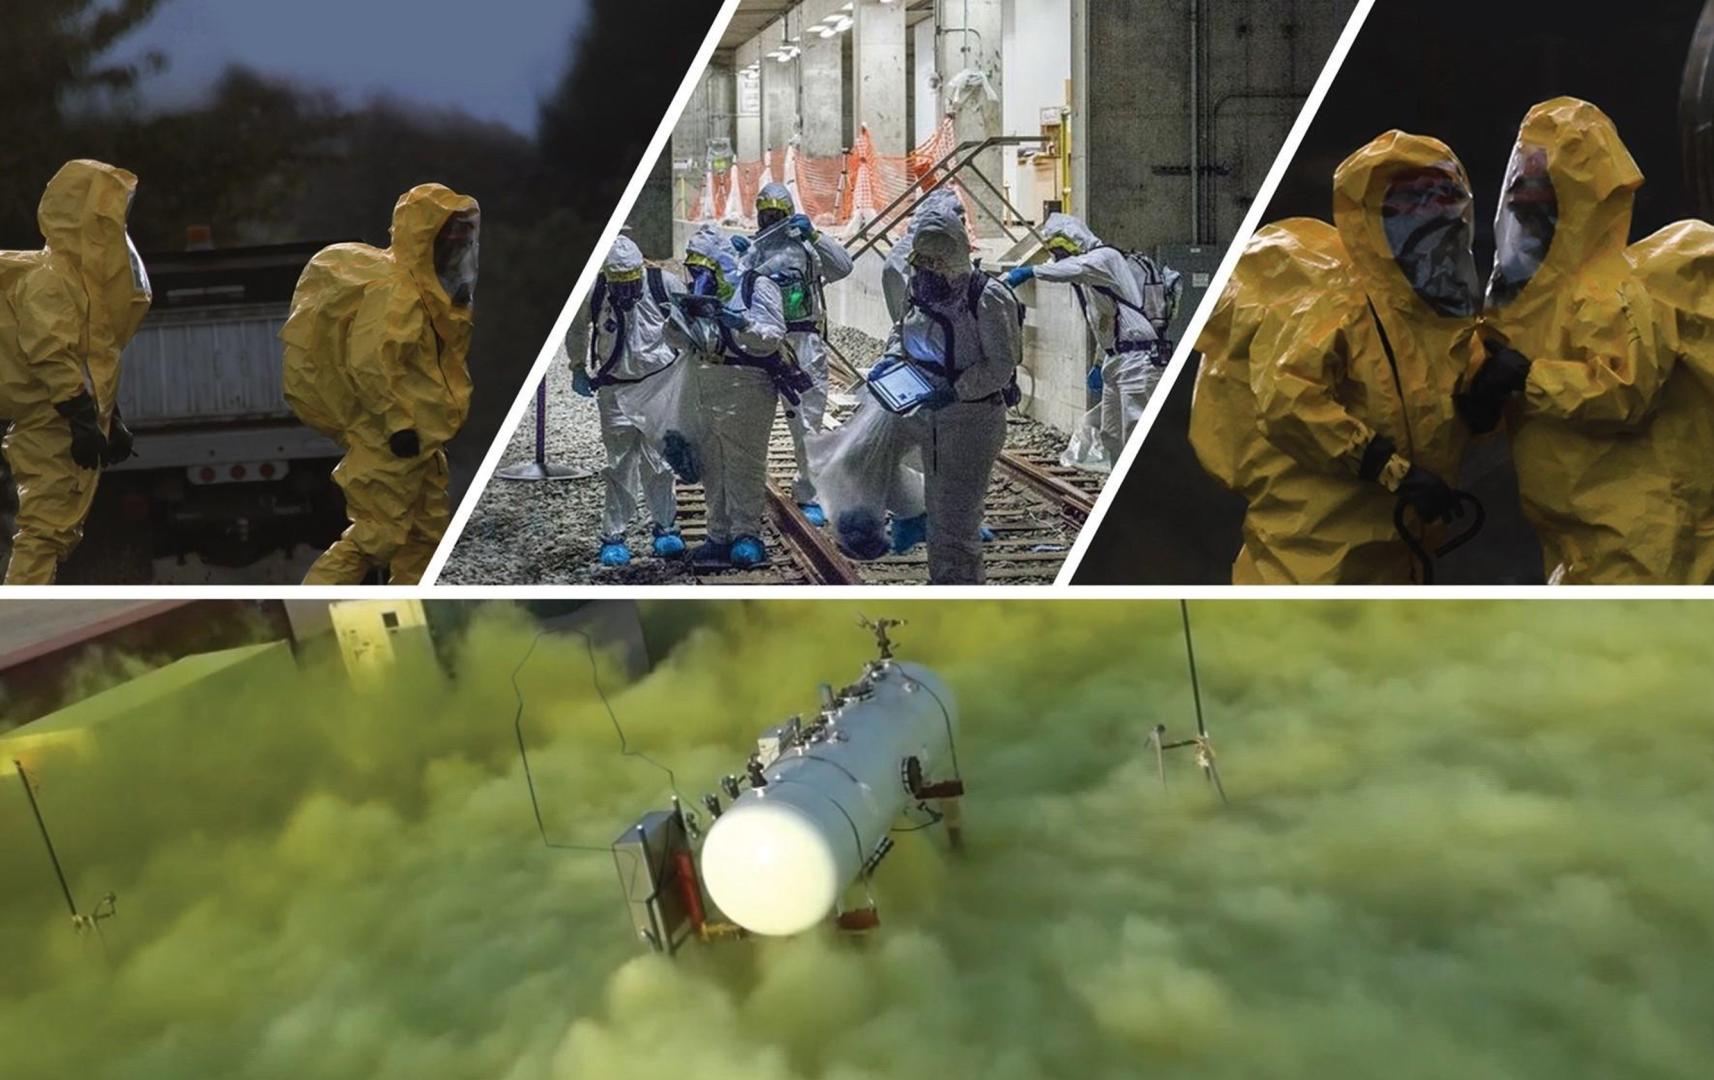 People in hazmat suits working near yellow chemical gas